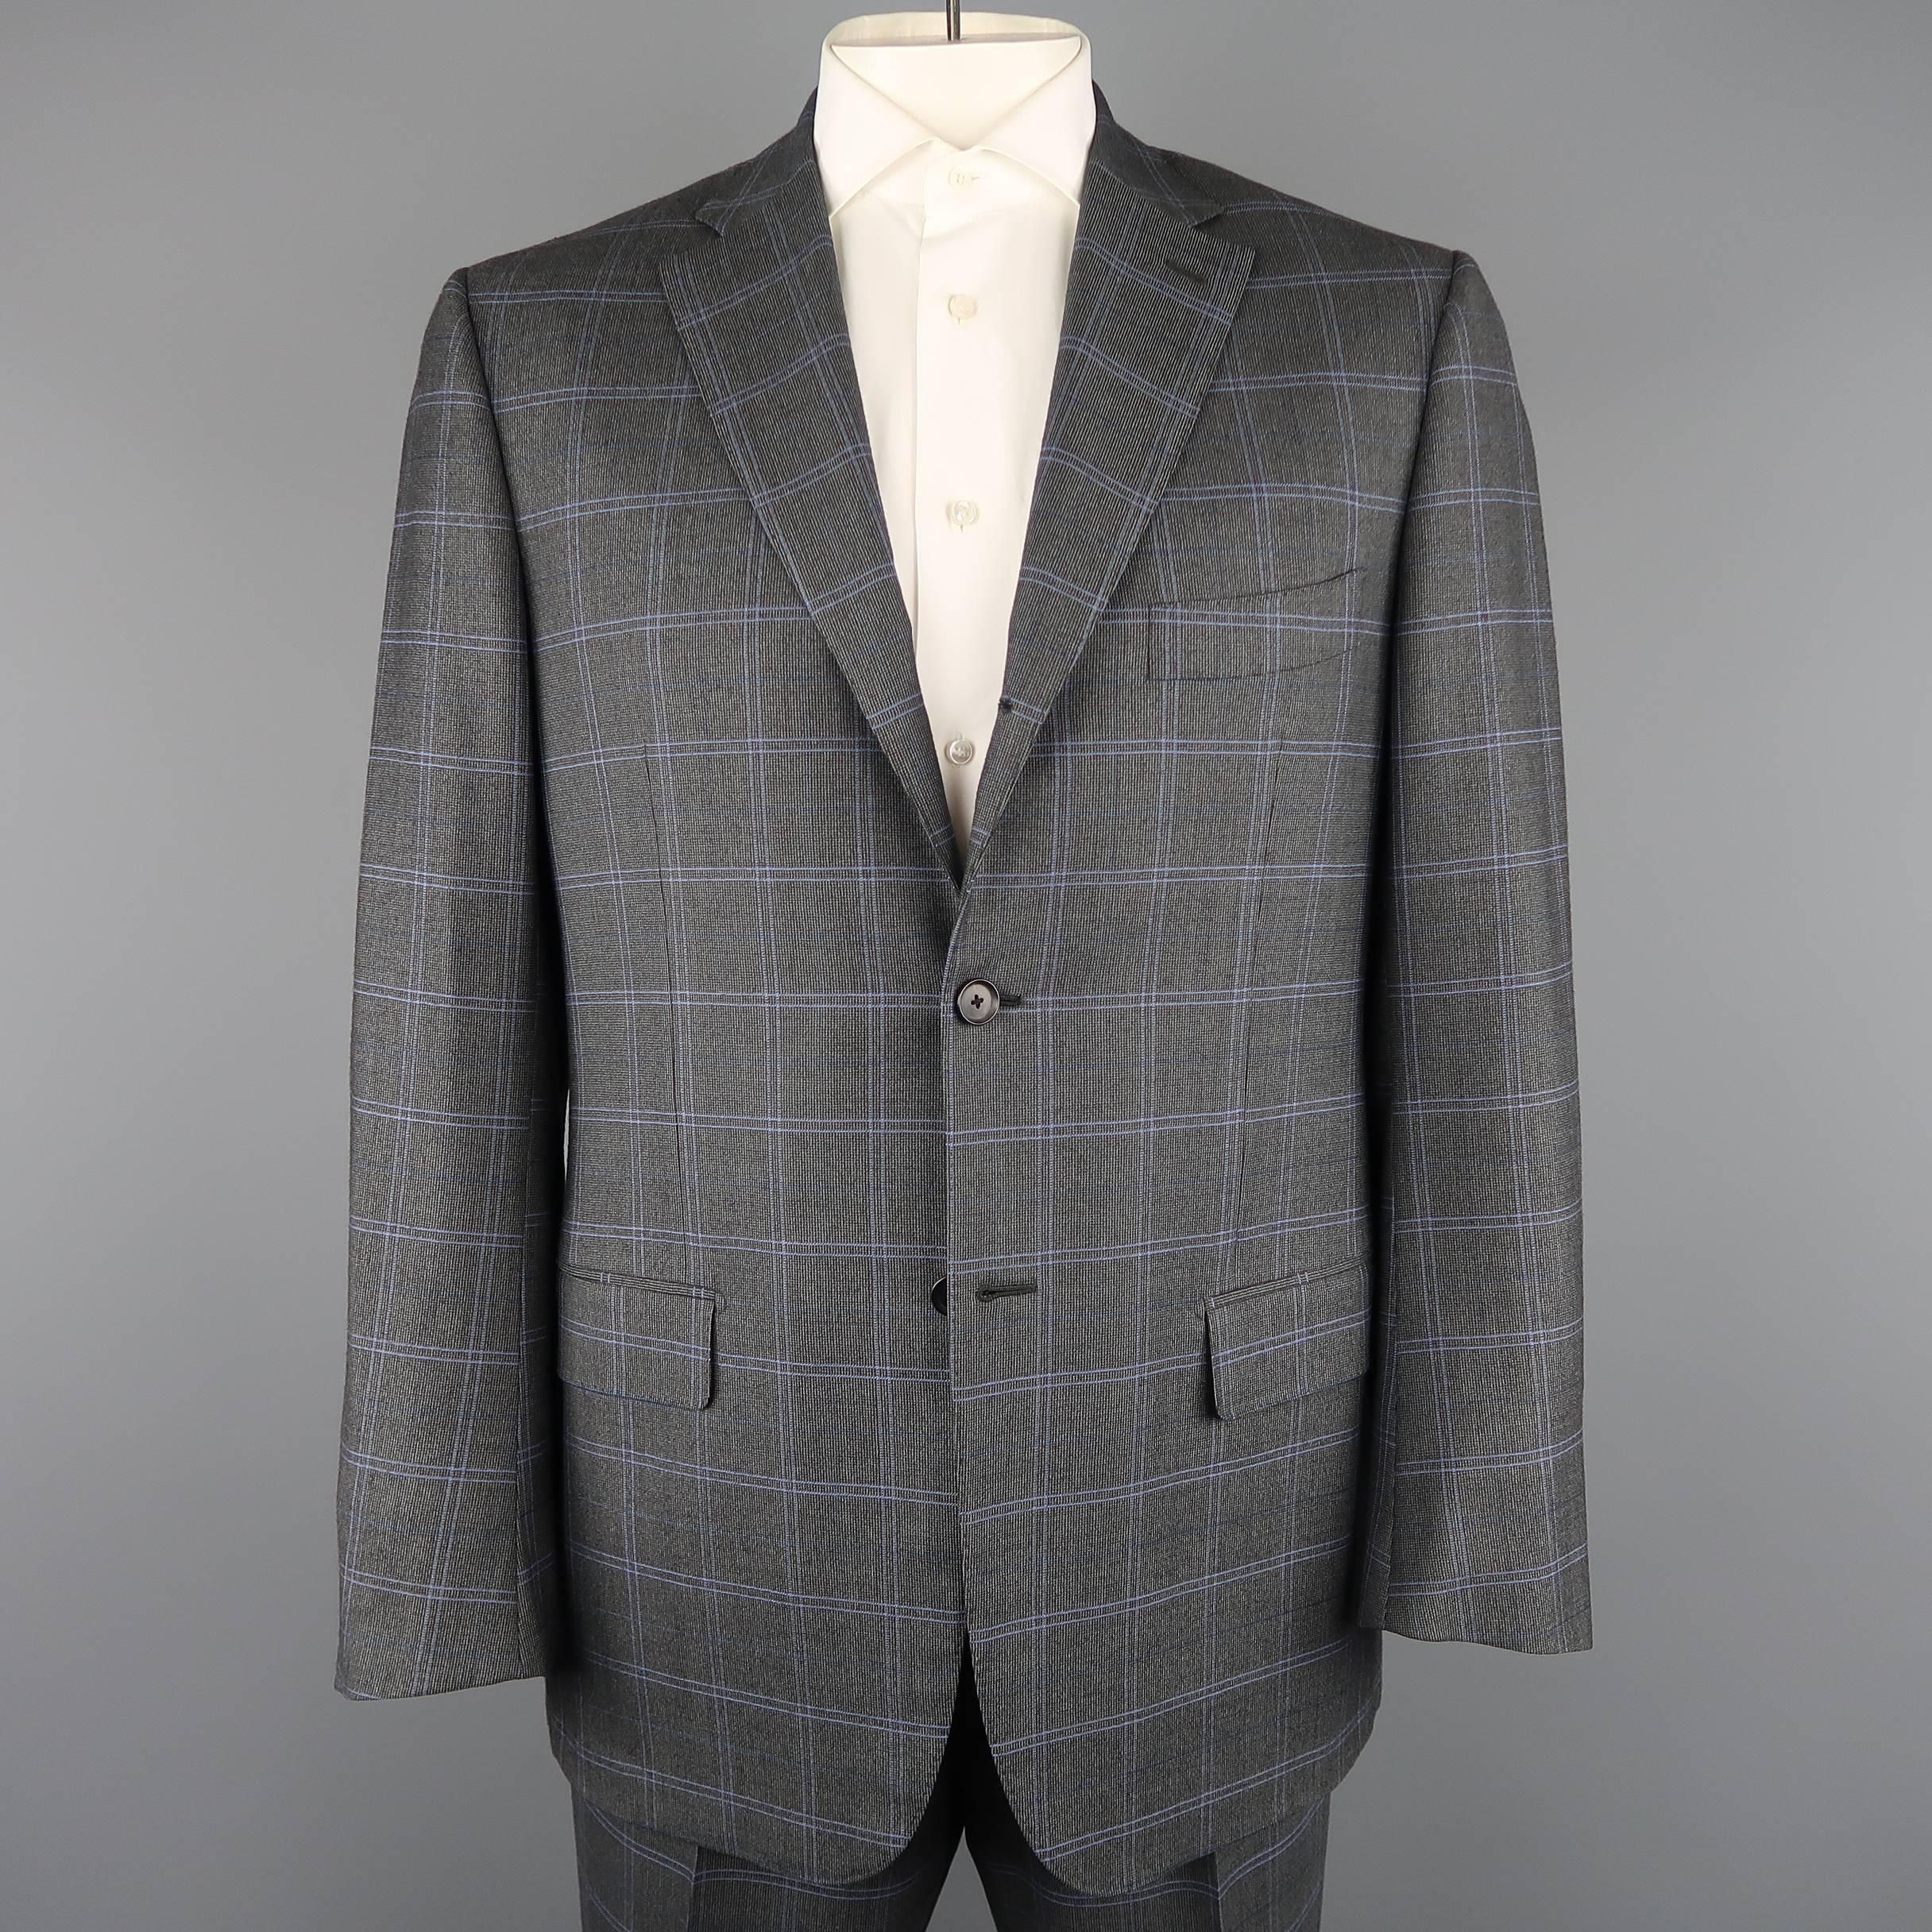 ISAIA two piece suit comes in dark gray wool with blue windowpane print throughout and includes a single breasted, three button, notch lapel sport coat with functional button cuffs and matching flat front, cuffed hem trousers. Made in Italy.
 
Good